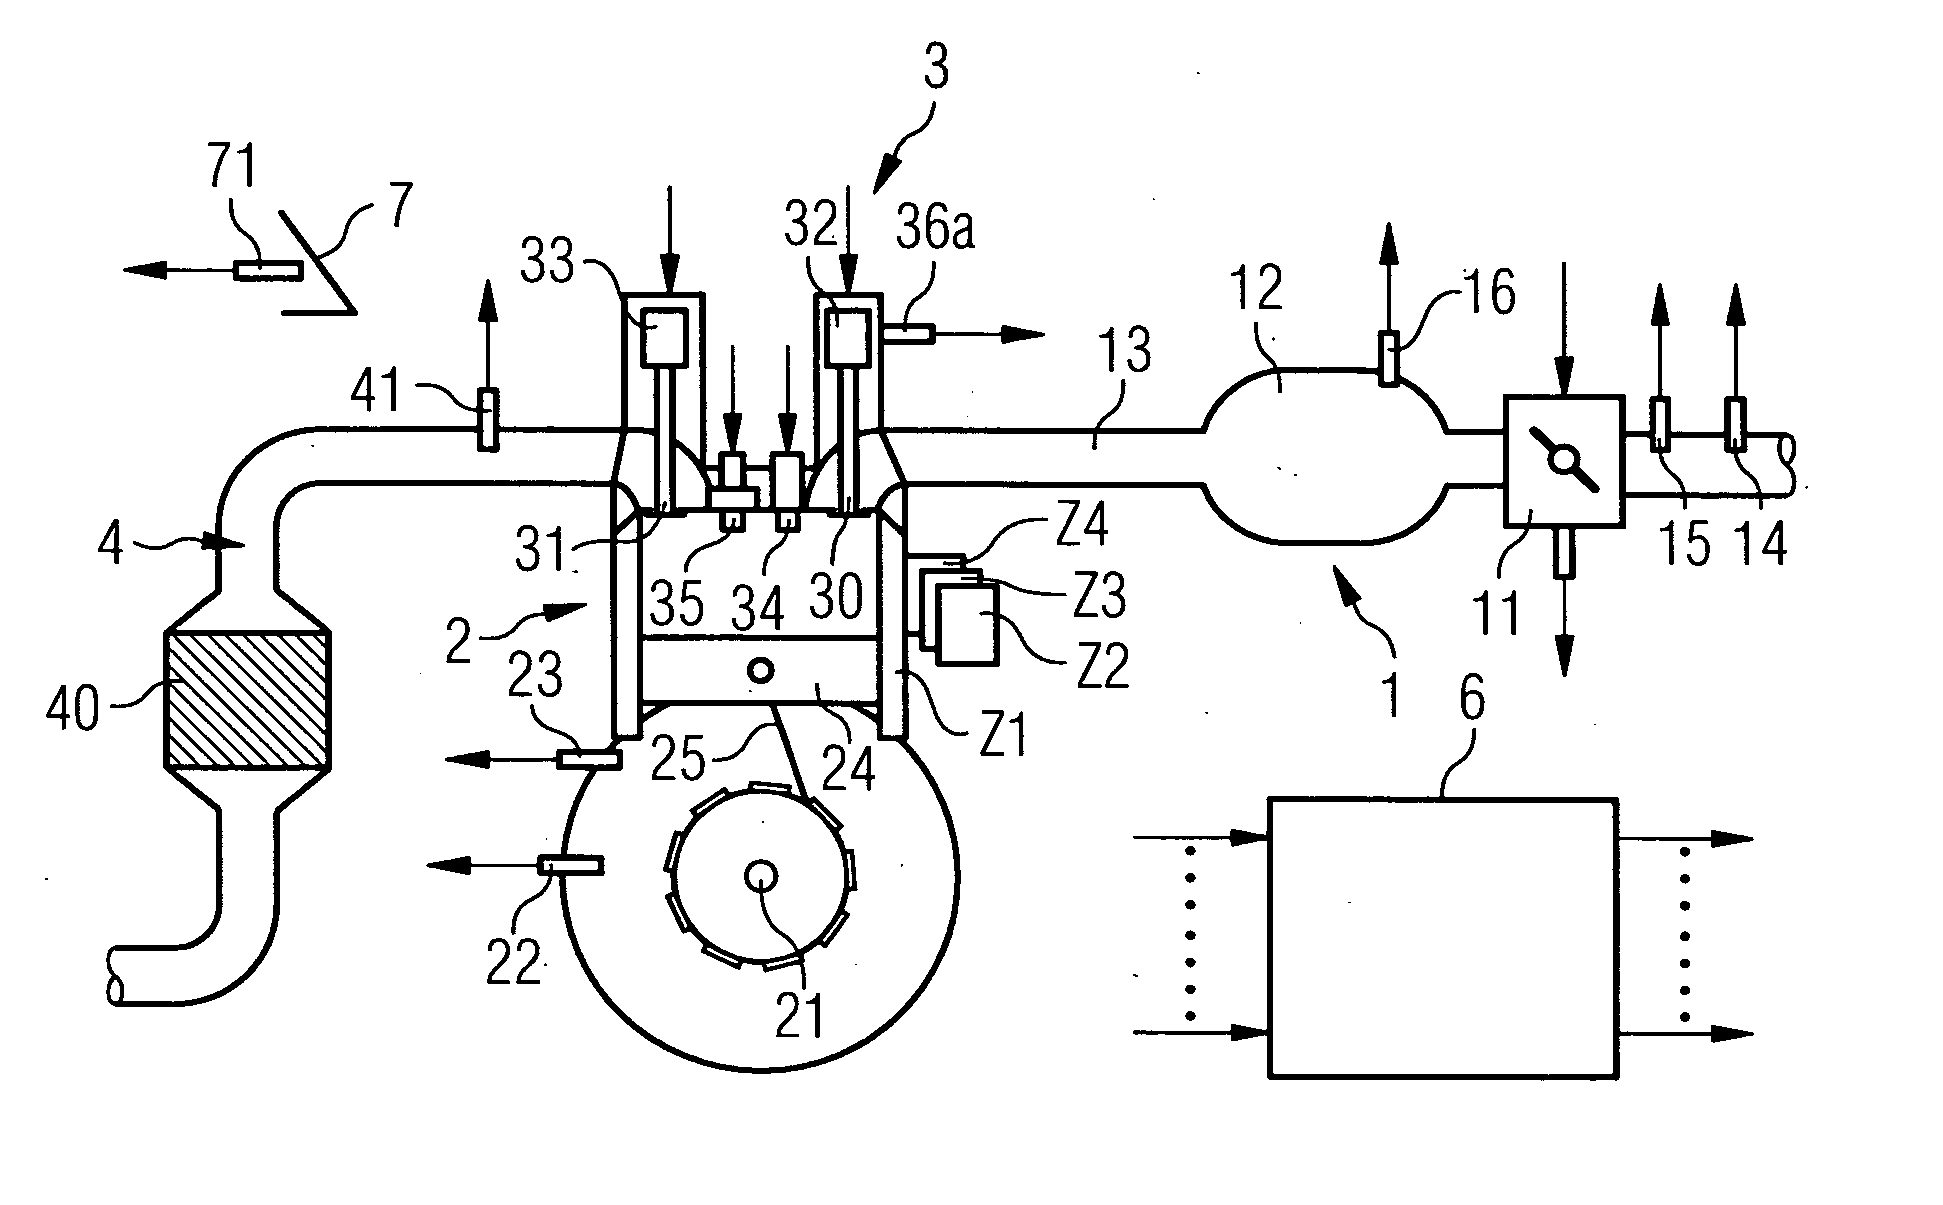 Method and Device for Controlling an Internal Combustion Engine